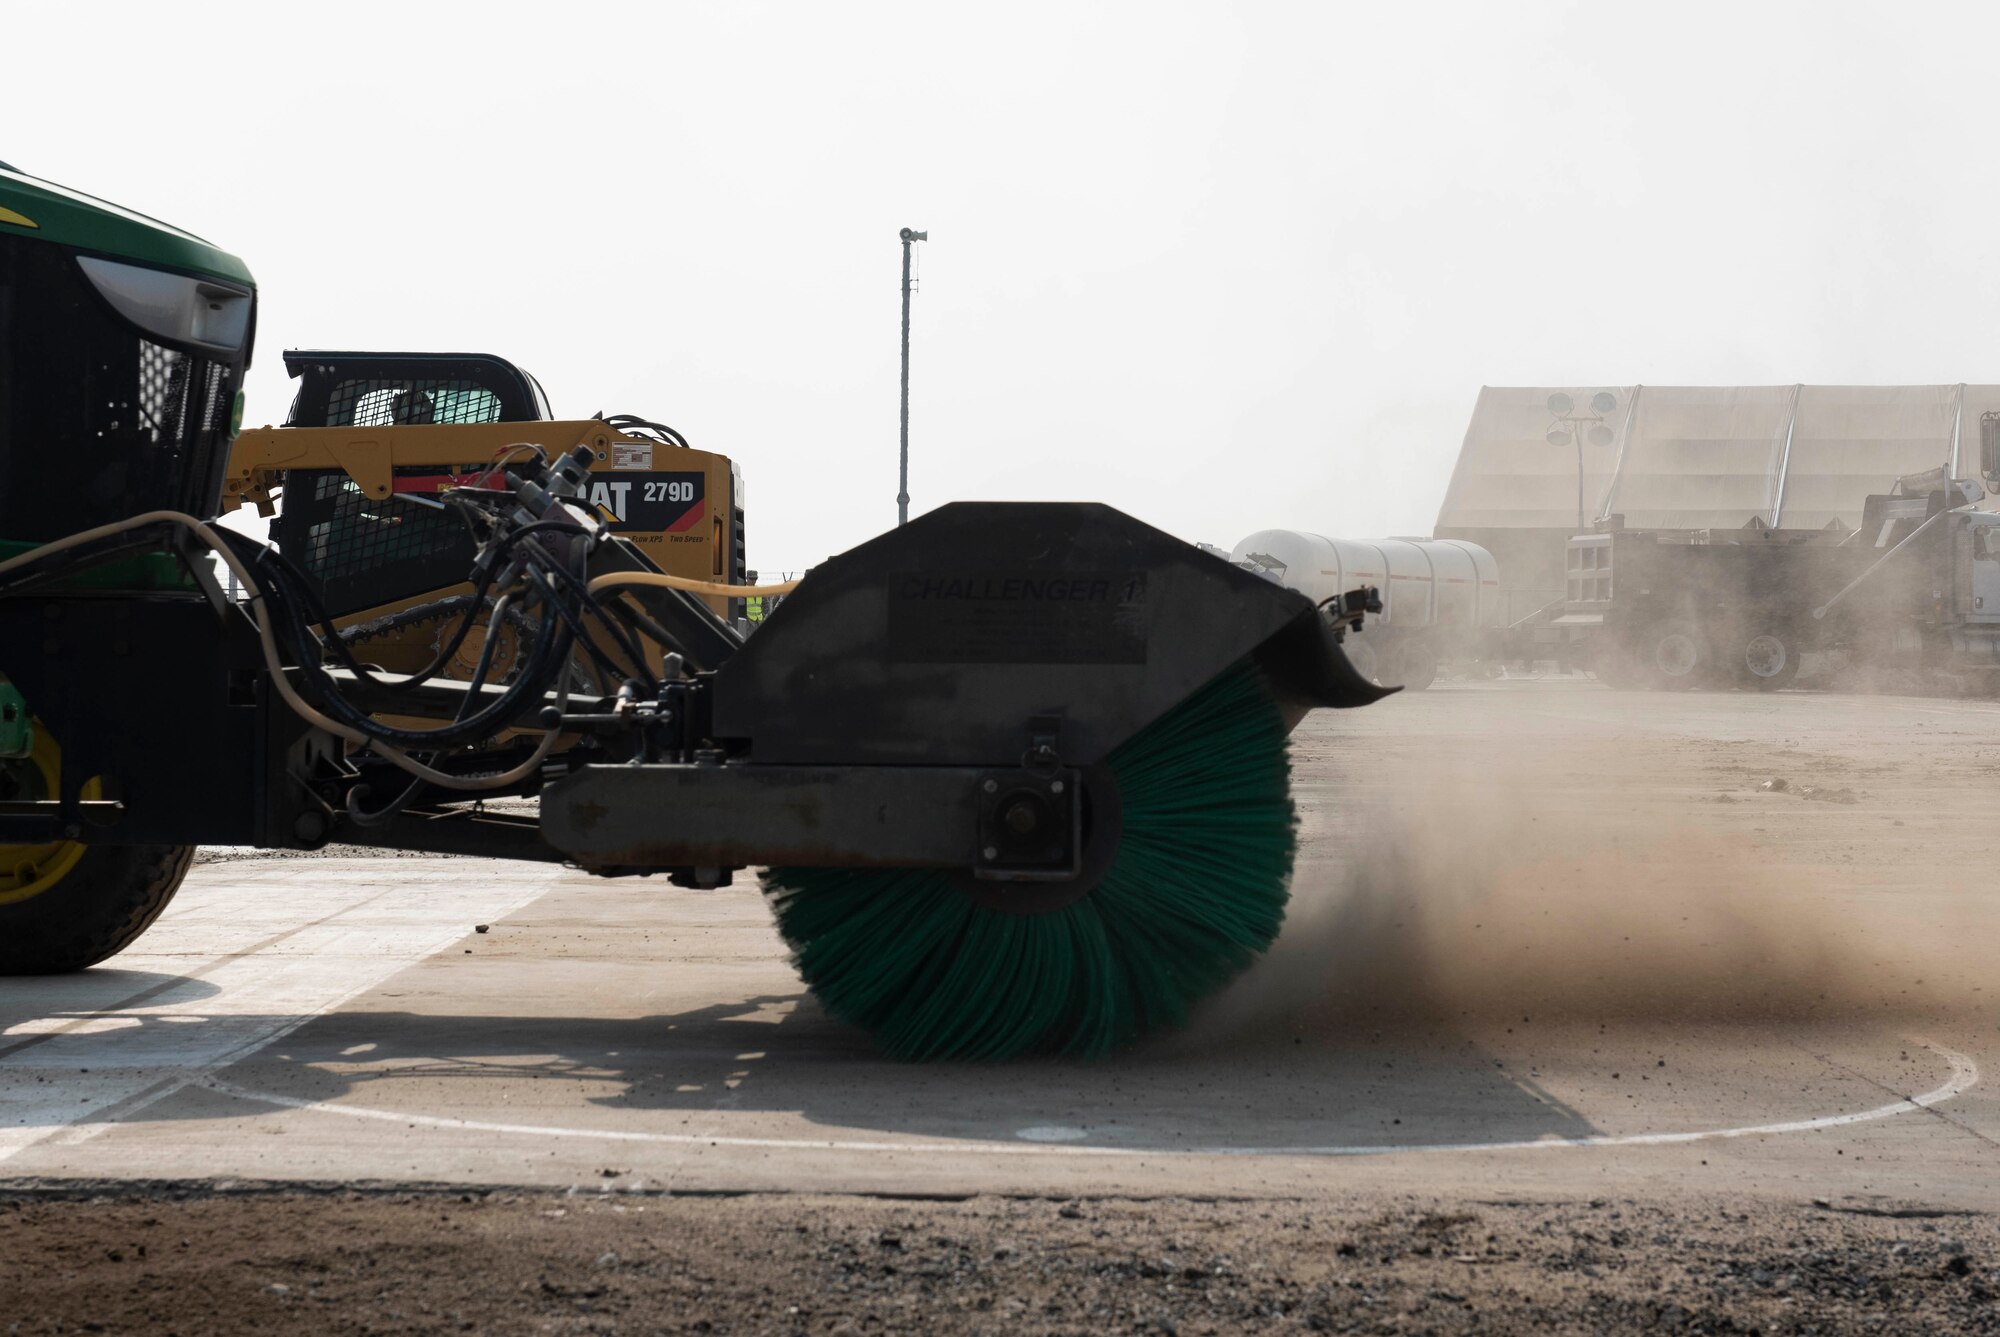 A tractor with a sweeper attachment removes debris during a Rapid Airfield Damage Recovery training exercise at Ali Al Salem Air Base, Kuwait, Nov. 16, 2020. Once the debris is removed and the concrete dries, the repaired airfield would be operational again. (U.S. Air Force photo by Staff Sgt. Kenneth Boyton)